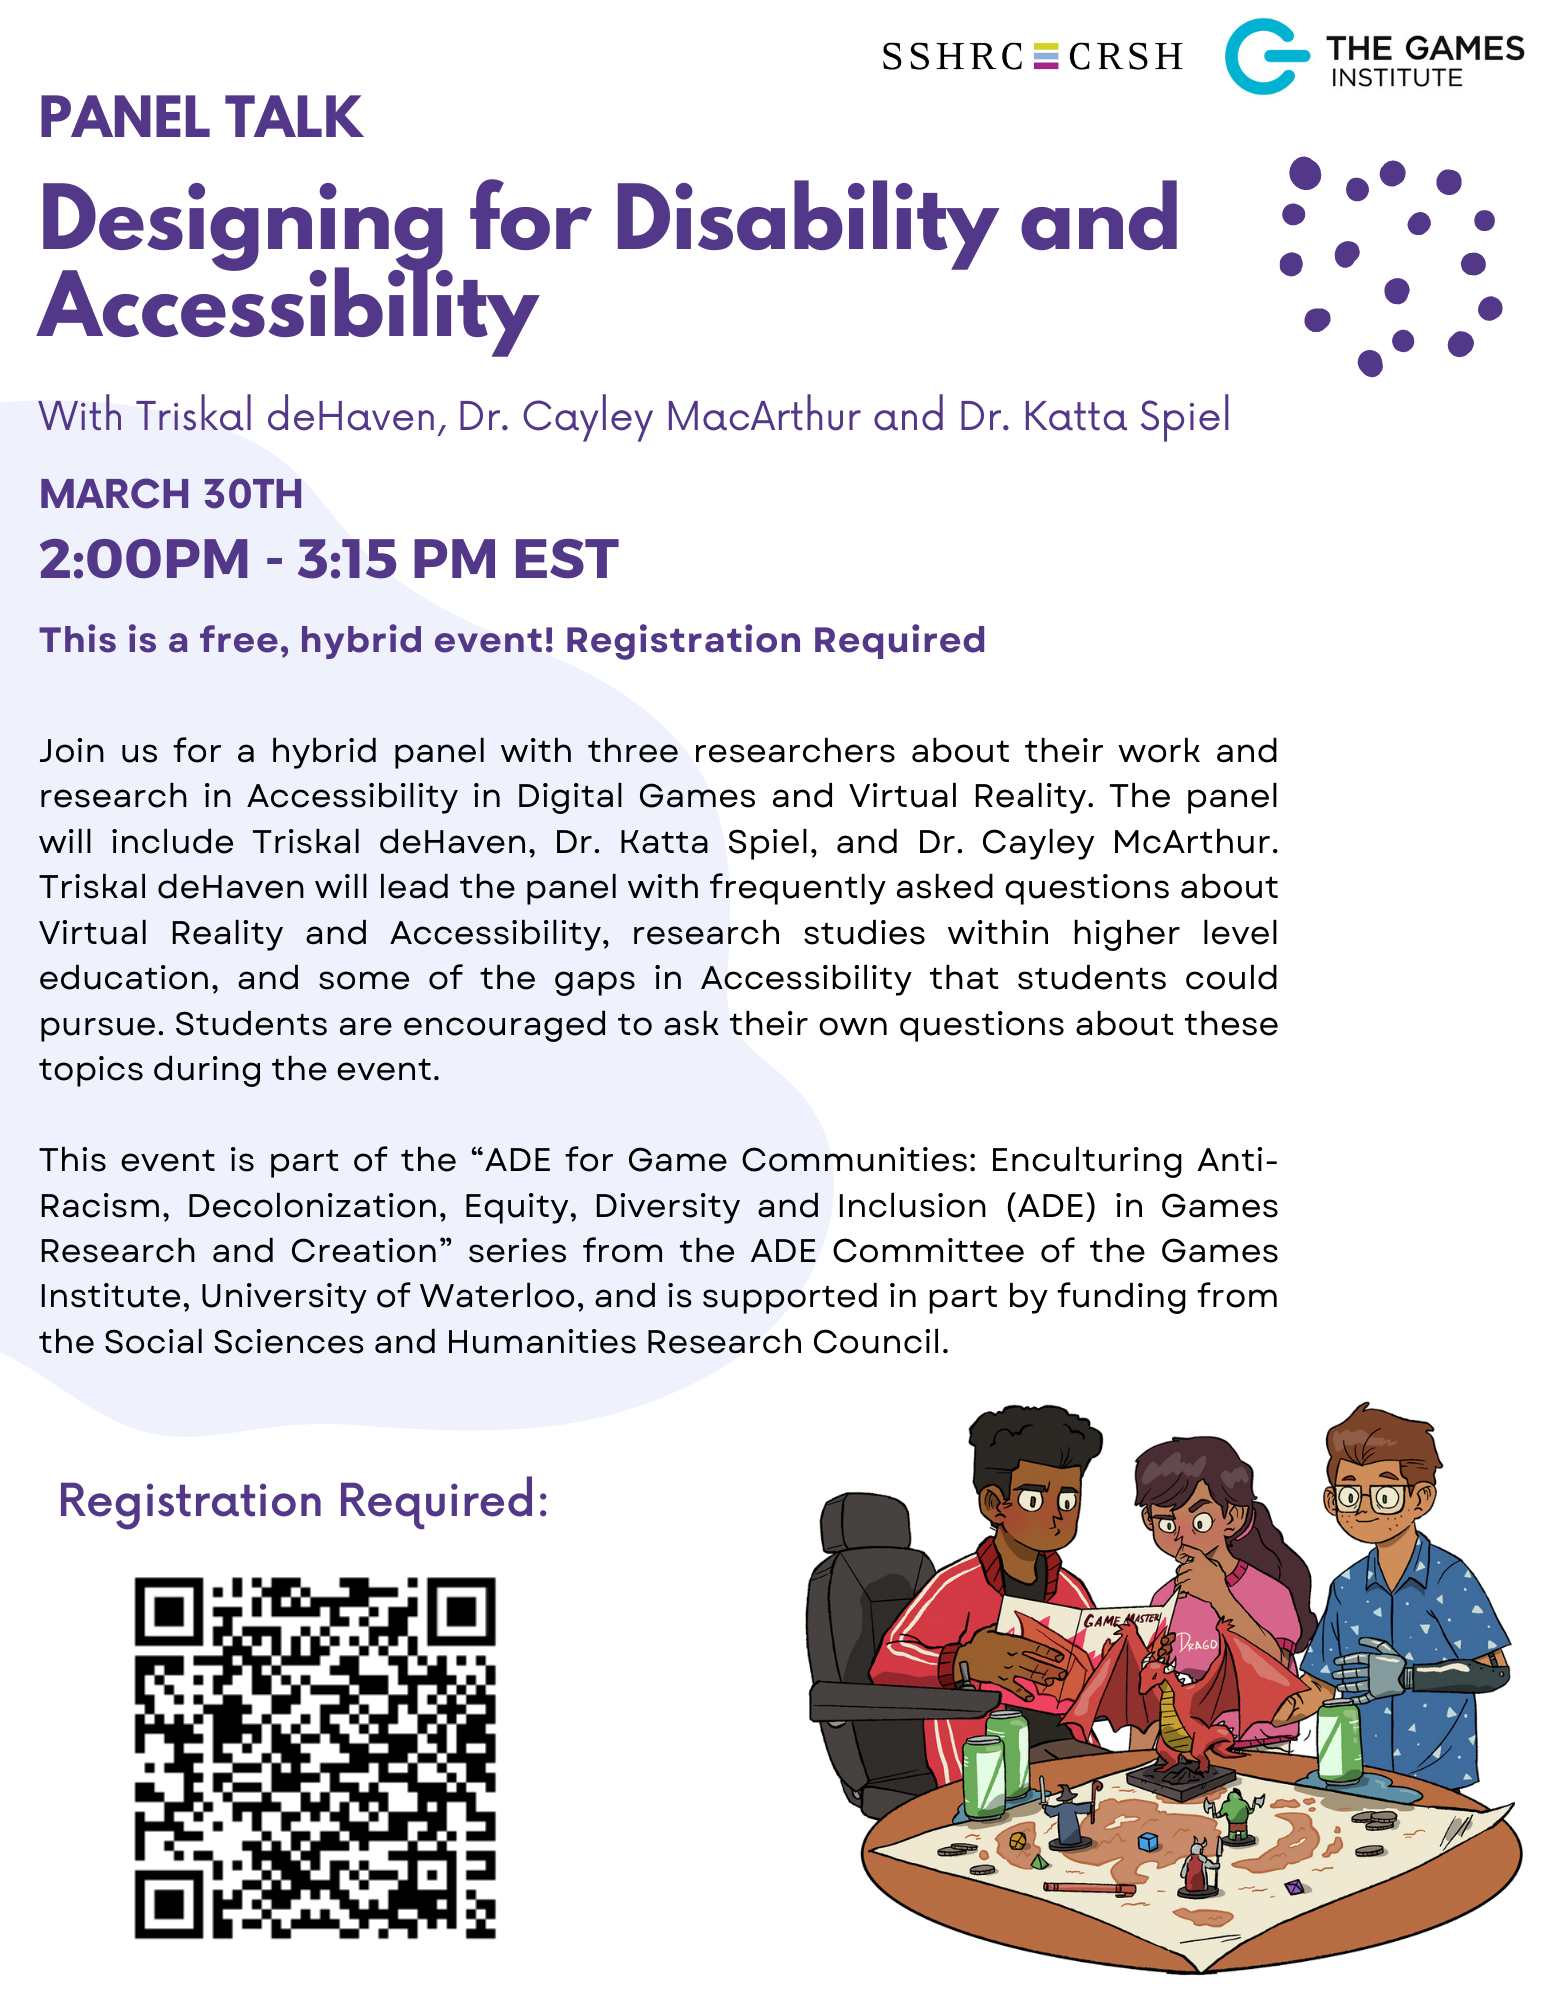 Promotional poster for "Panel on Designing for Disability and Accessibility" 